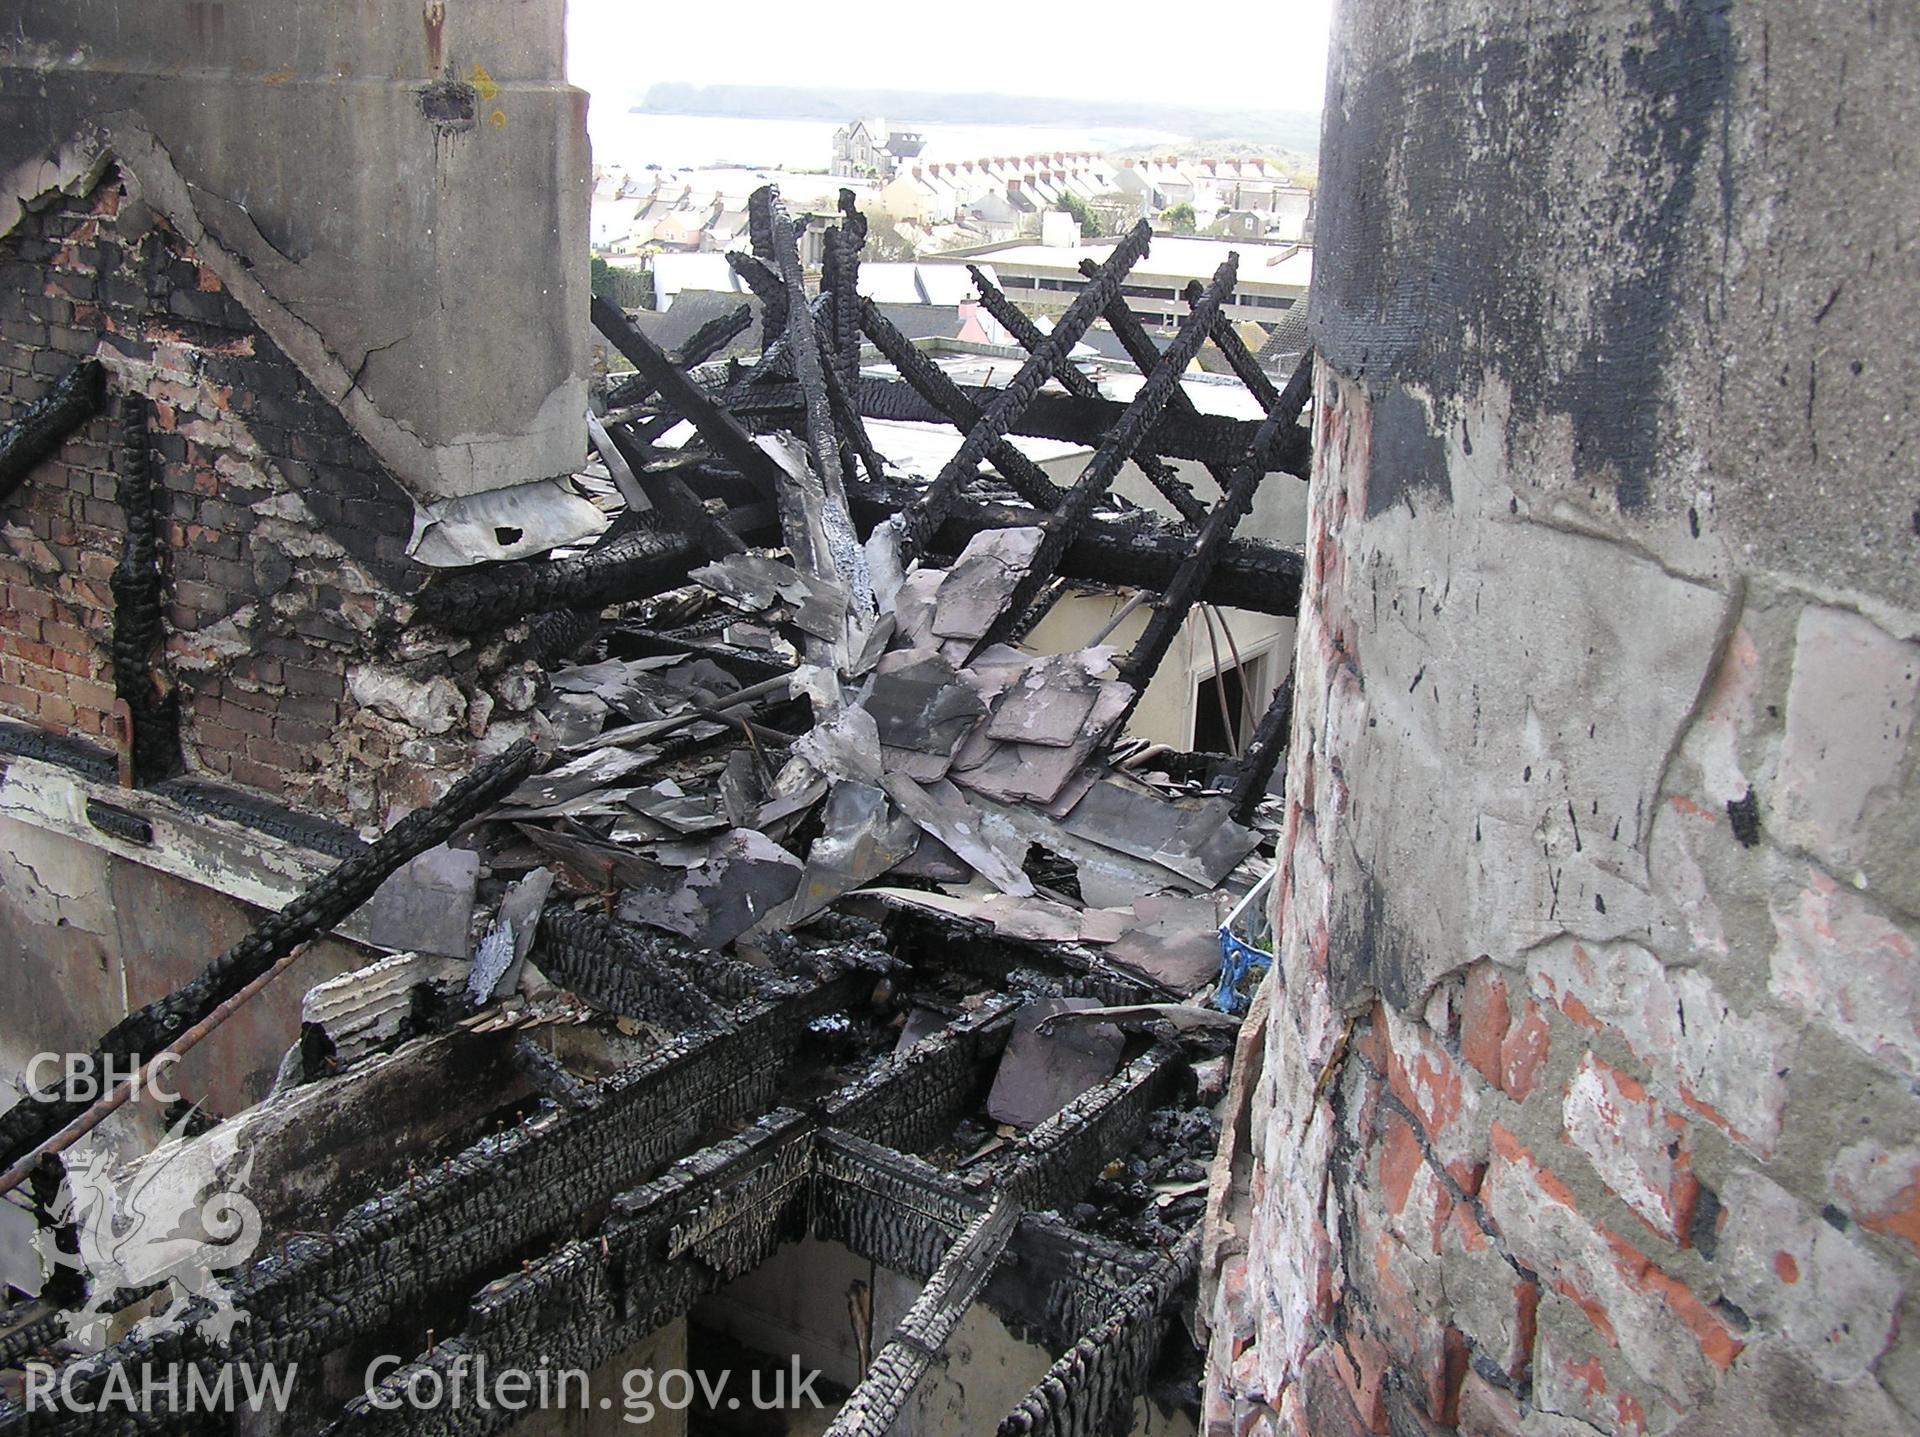 Colour digital photograph showing part of the wreckage of the Royal Gatehouse Hotel.